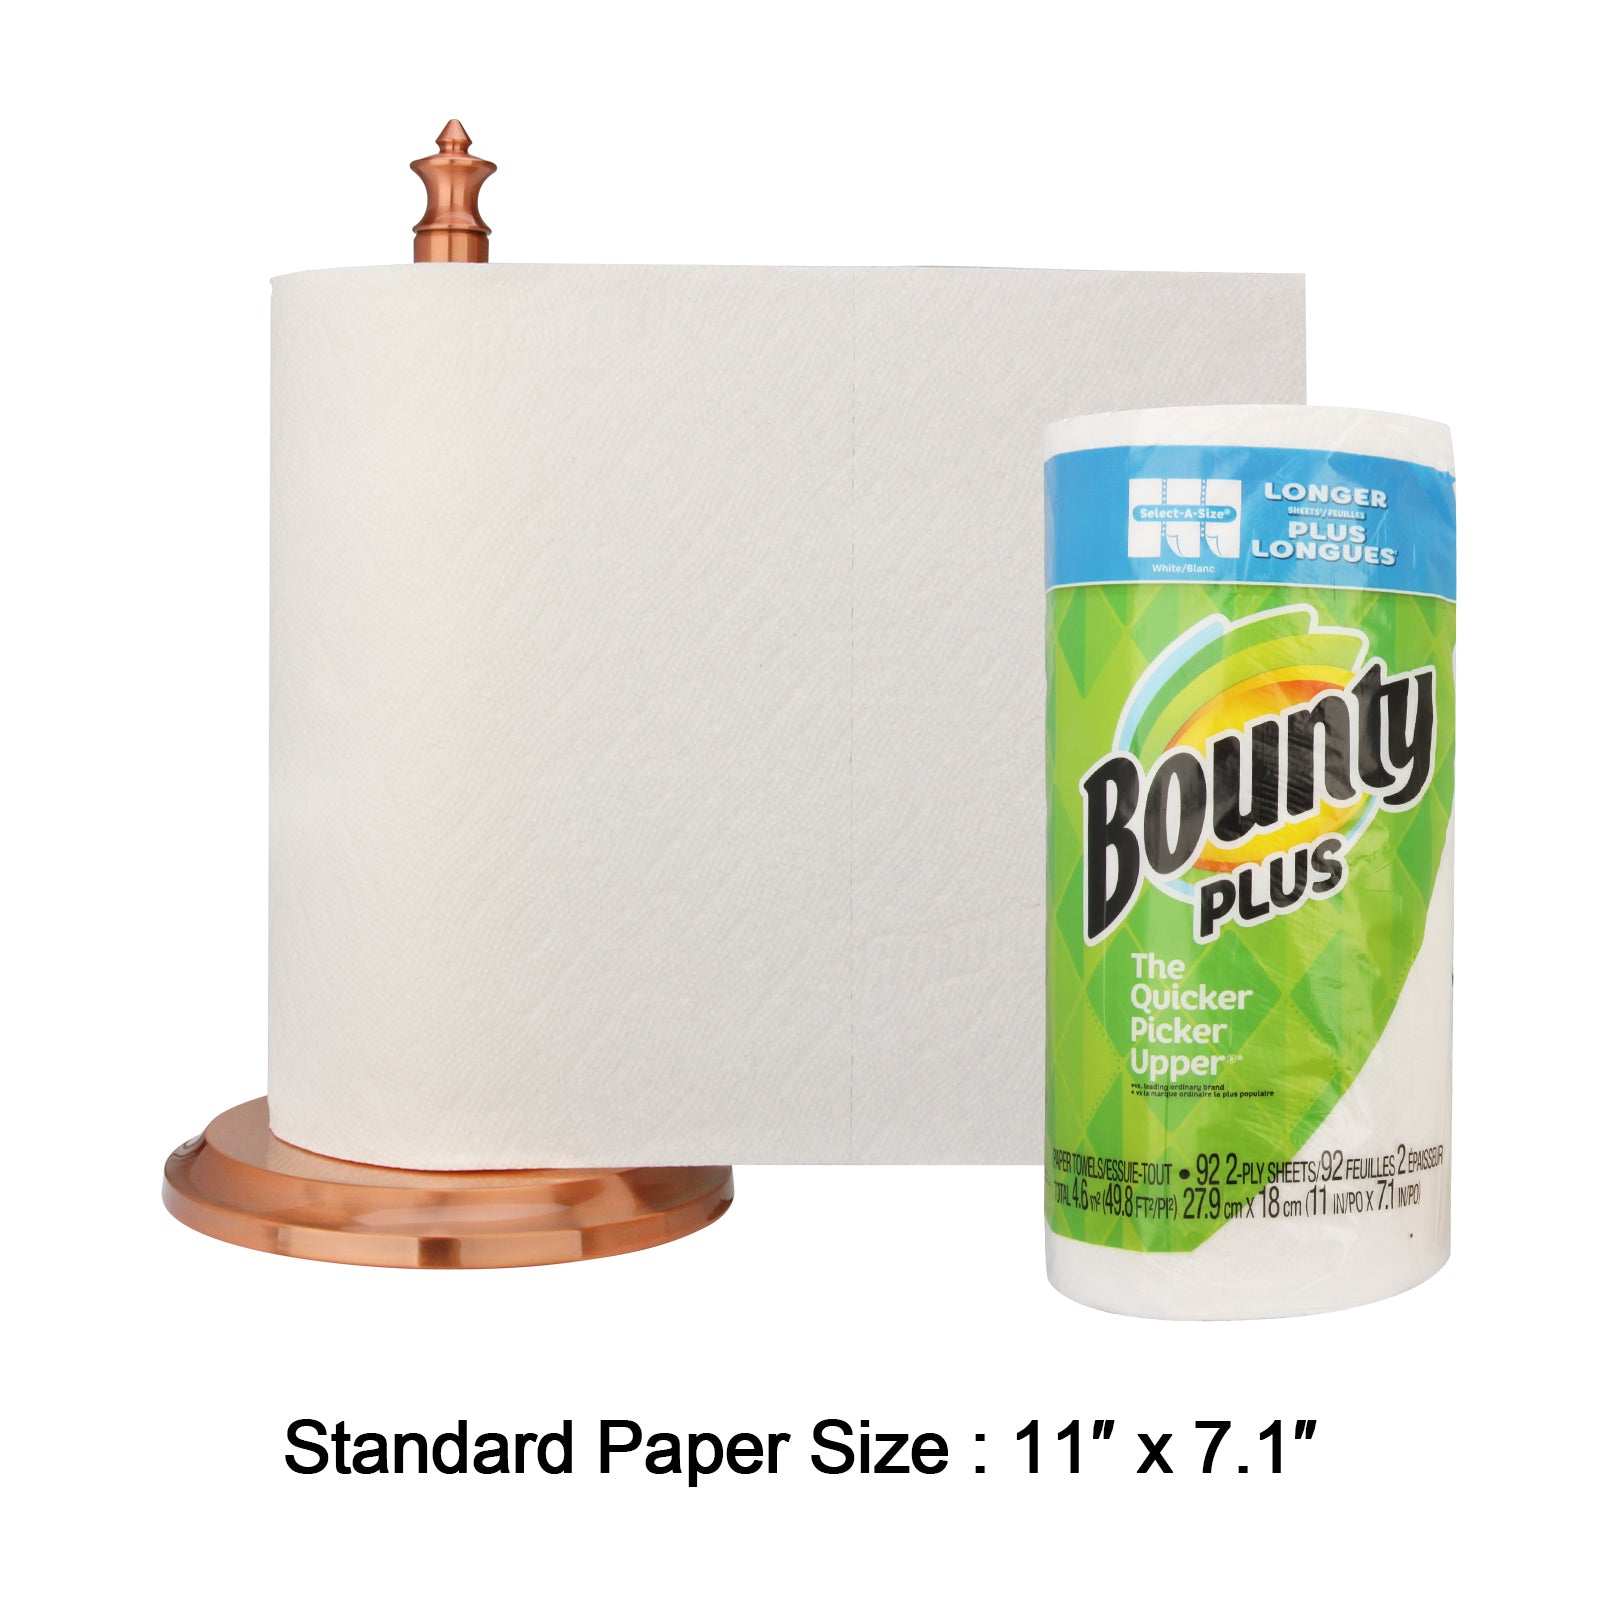 Copper Paper Towel Holder Roll Dispenser Stand for Kitchen Countertop